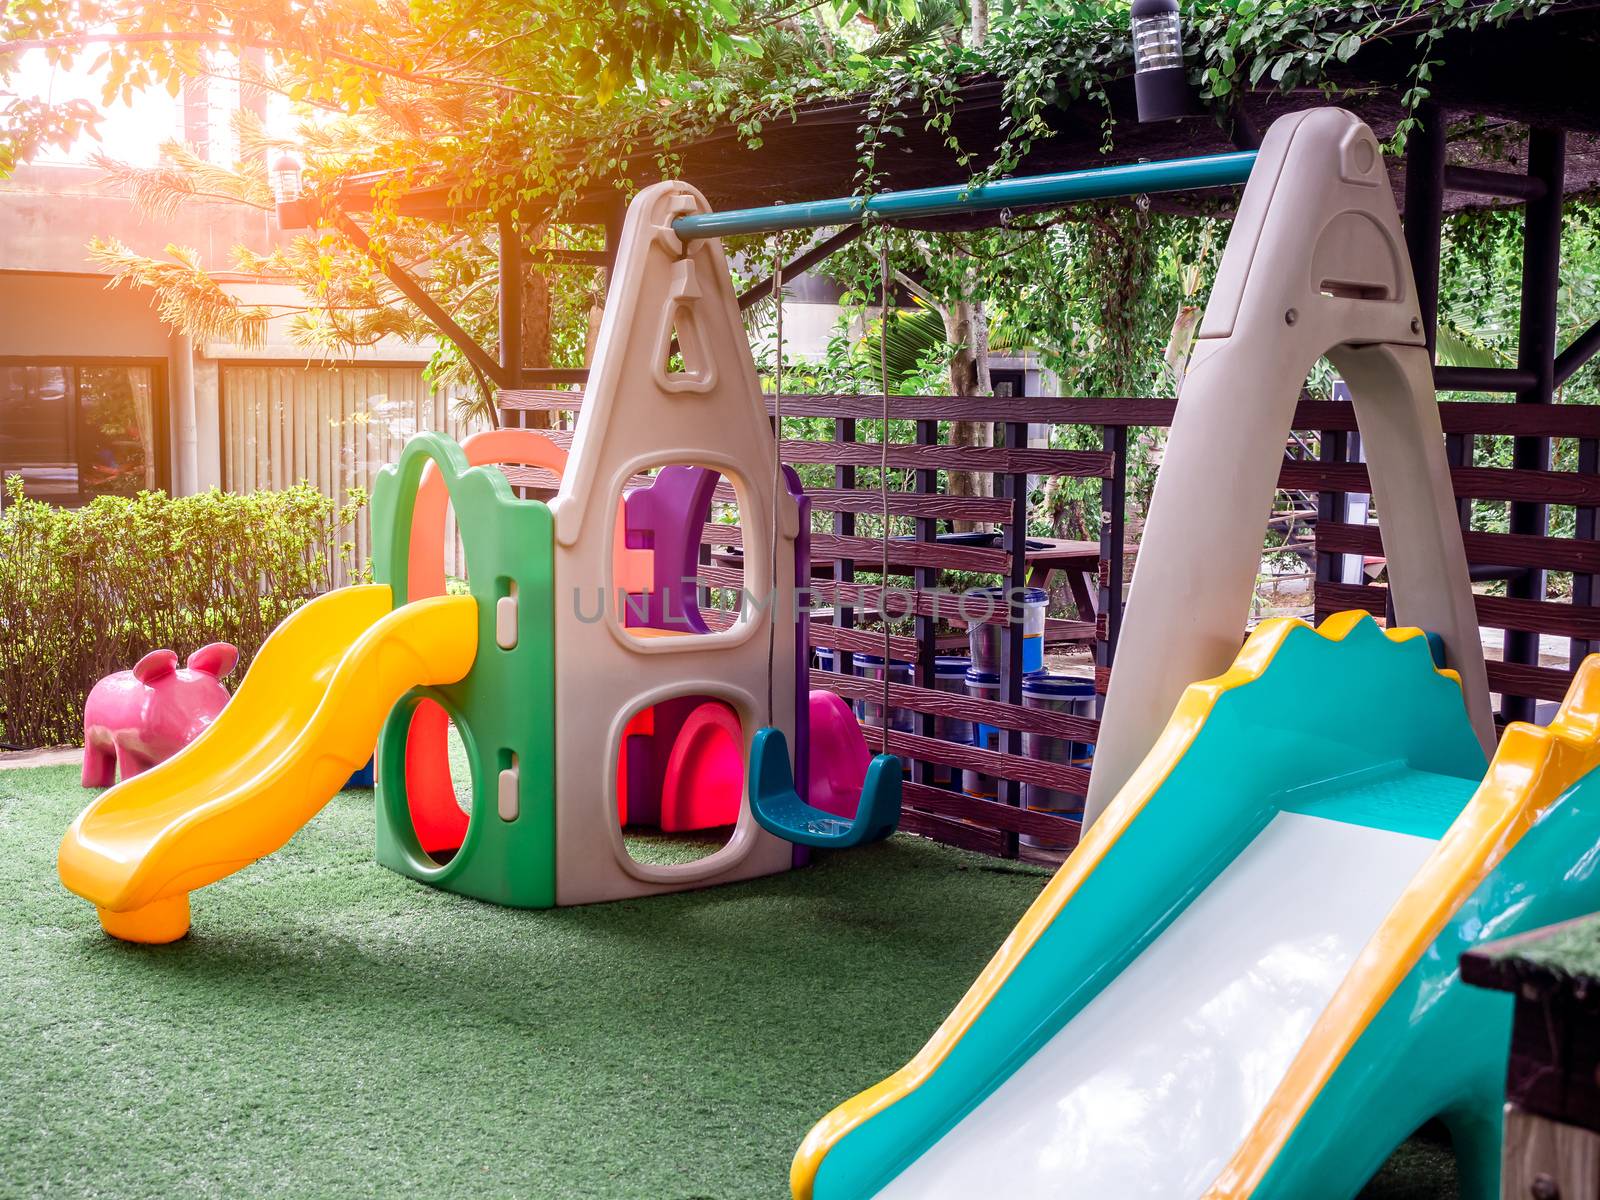 Colorful playground equipment on green yard, small area for children. Swing seats and garden slides on green grass with warm sunlight in the morning.